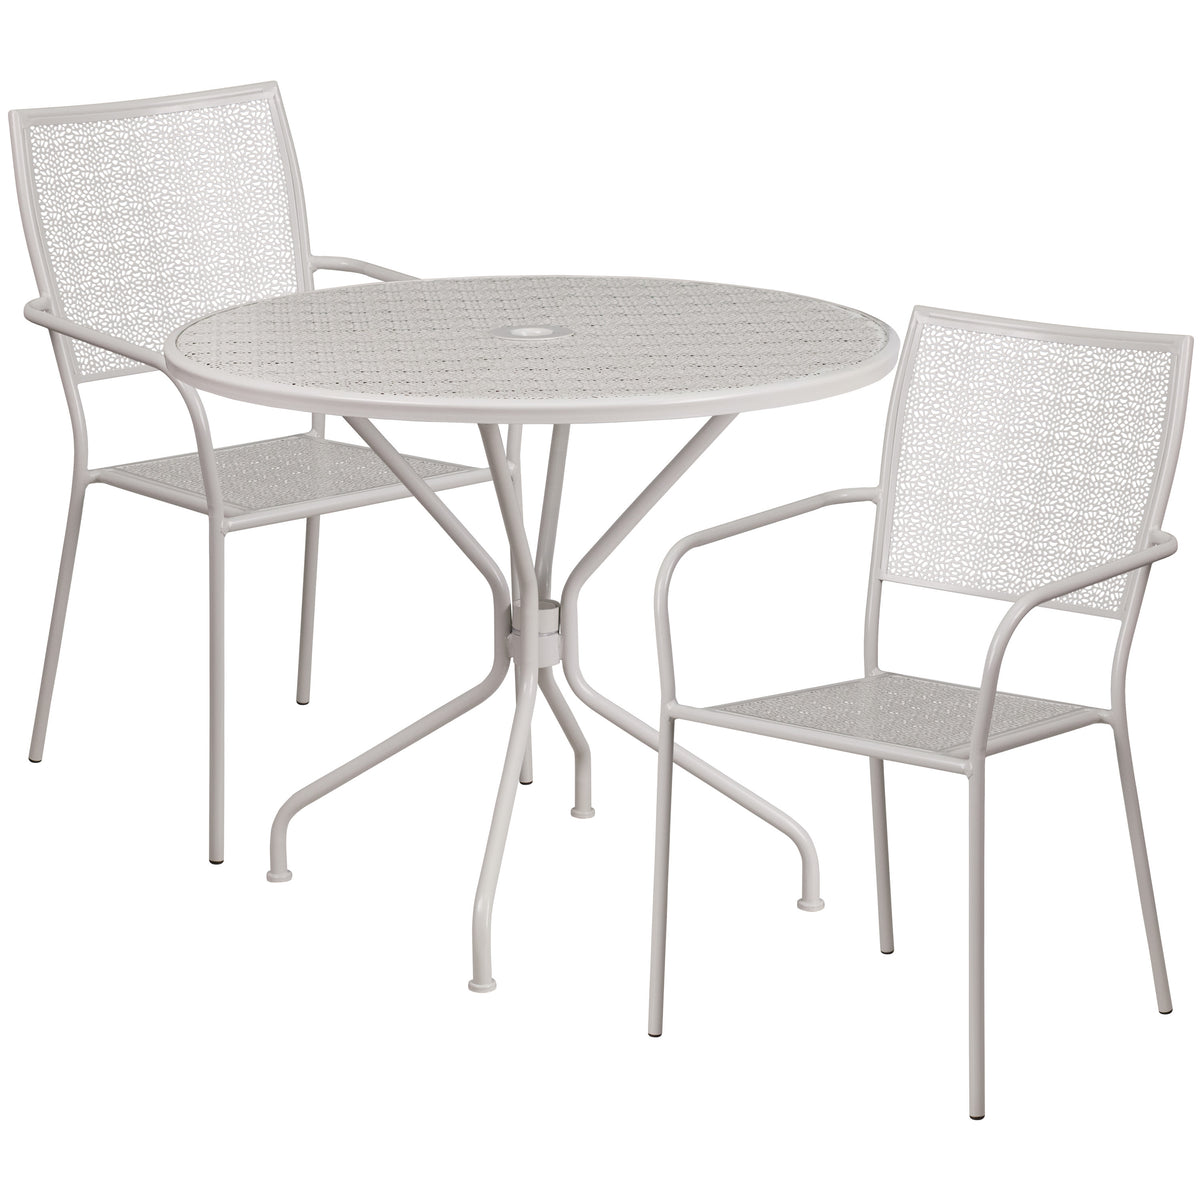 Light Gray |#| 35.25inch Round Lt Gray Indoor-Outdoor Steel Patio Table Set w/2 Square Back Chairs